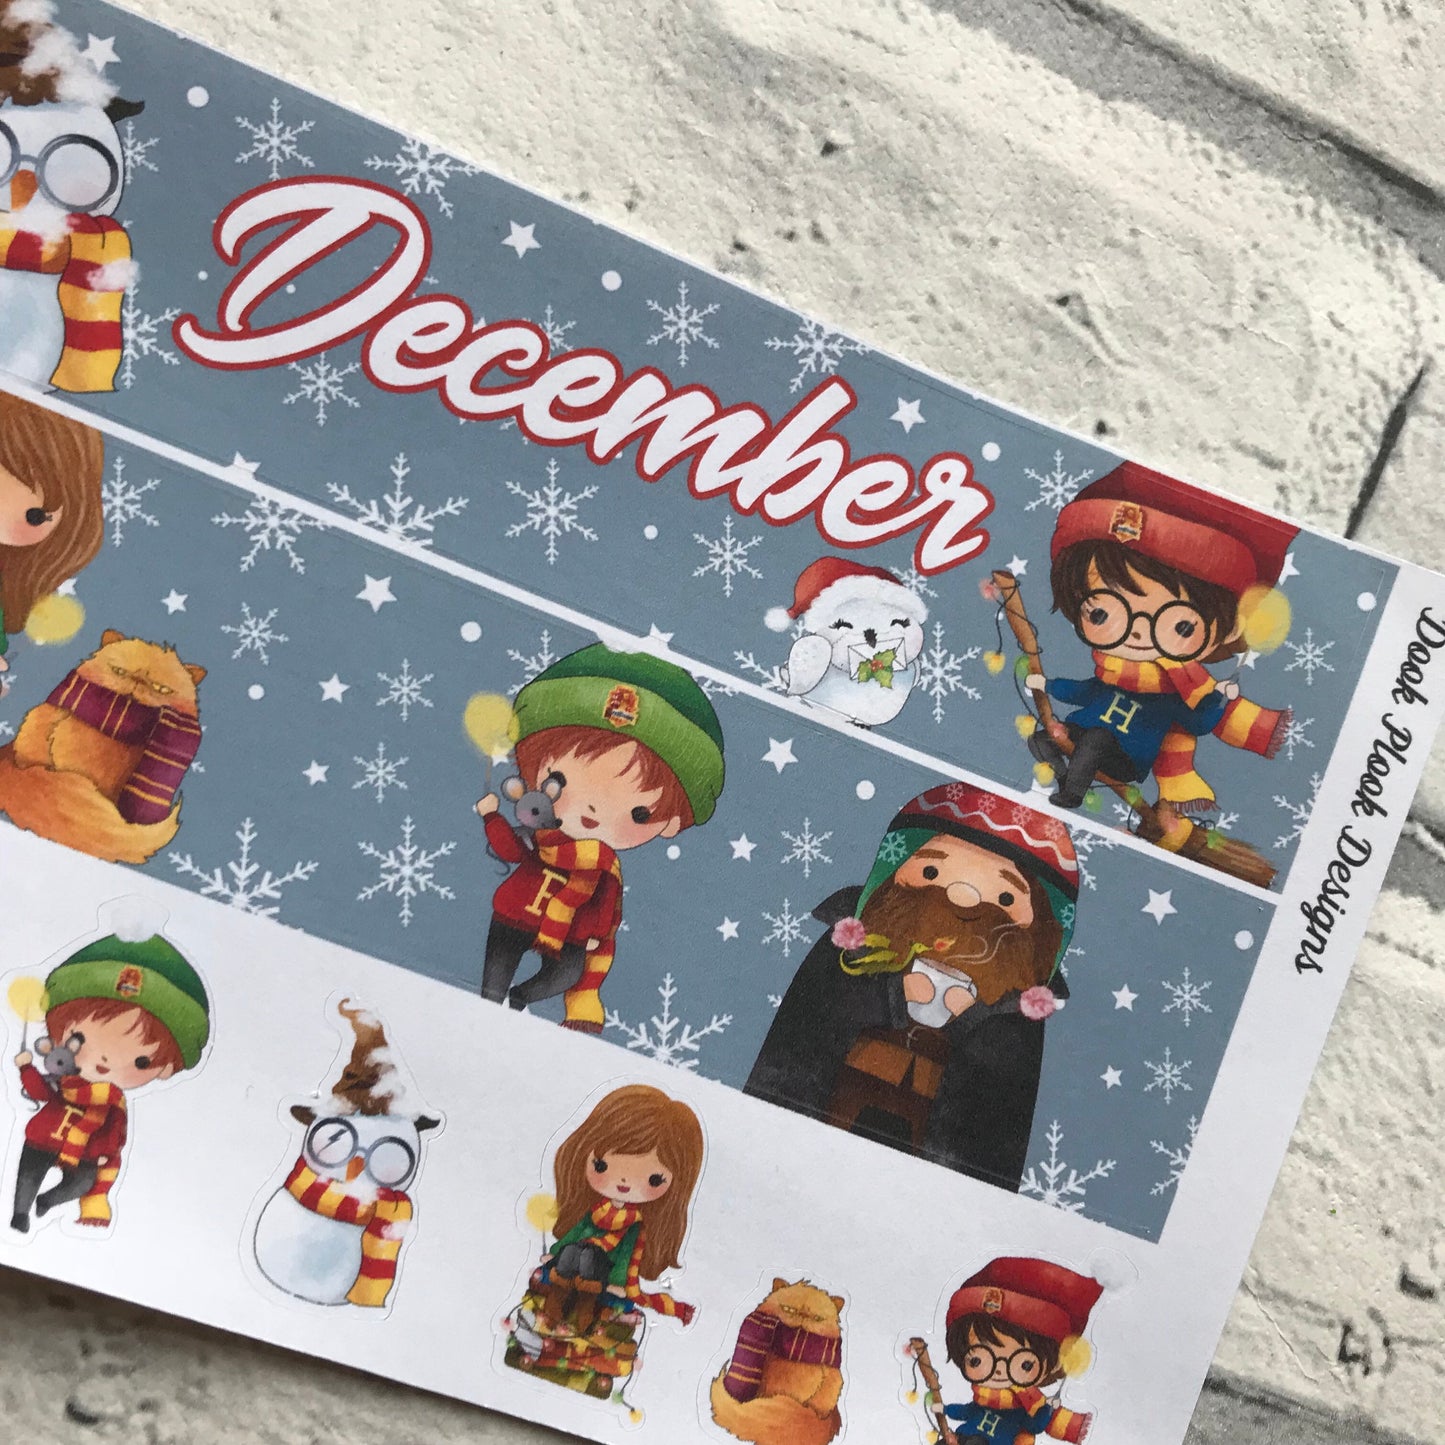 December (can change month) wizard Monthly View Kit for the Erin Condren Planners